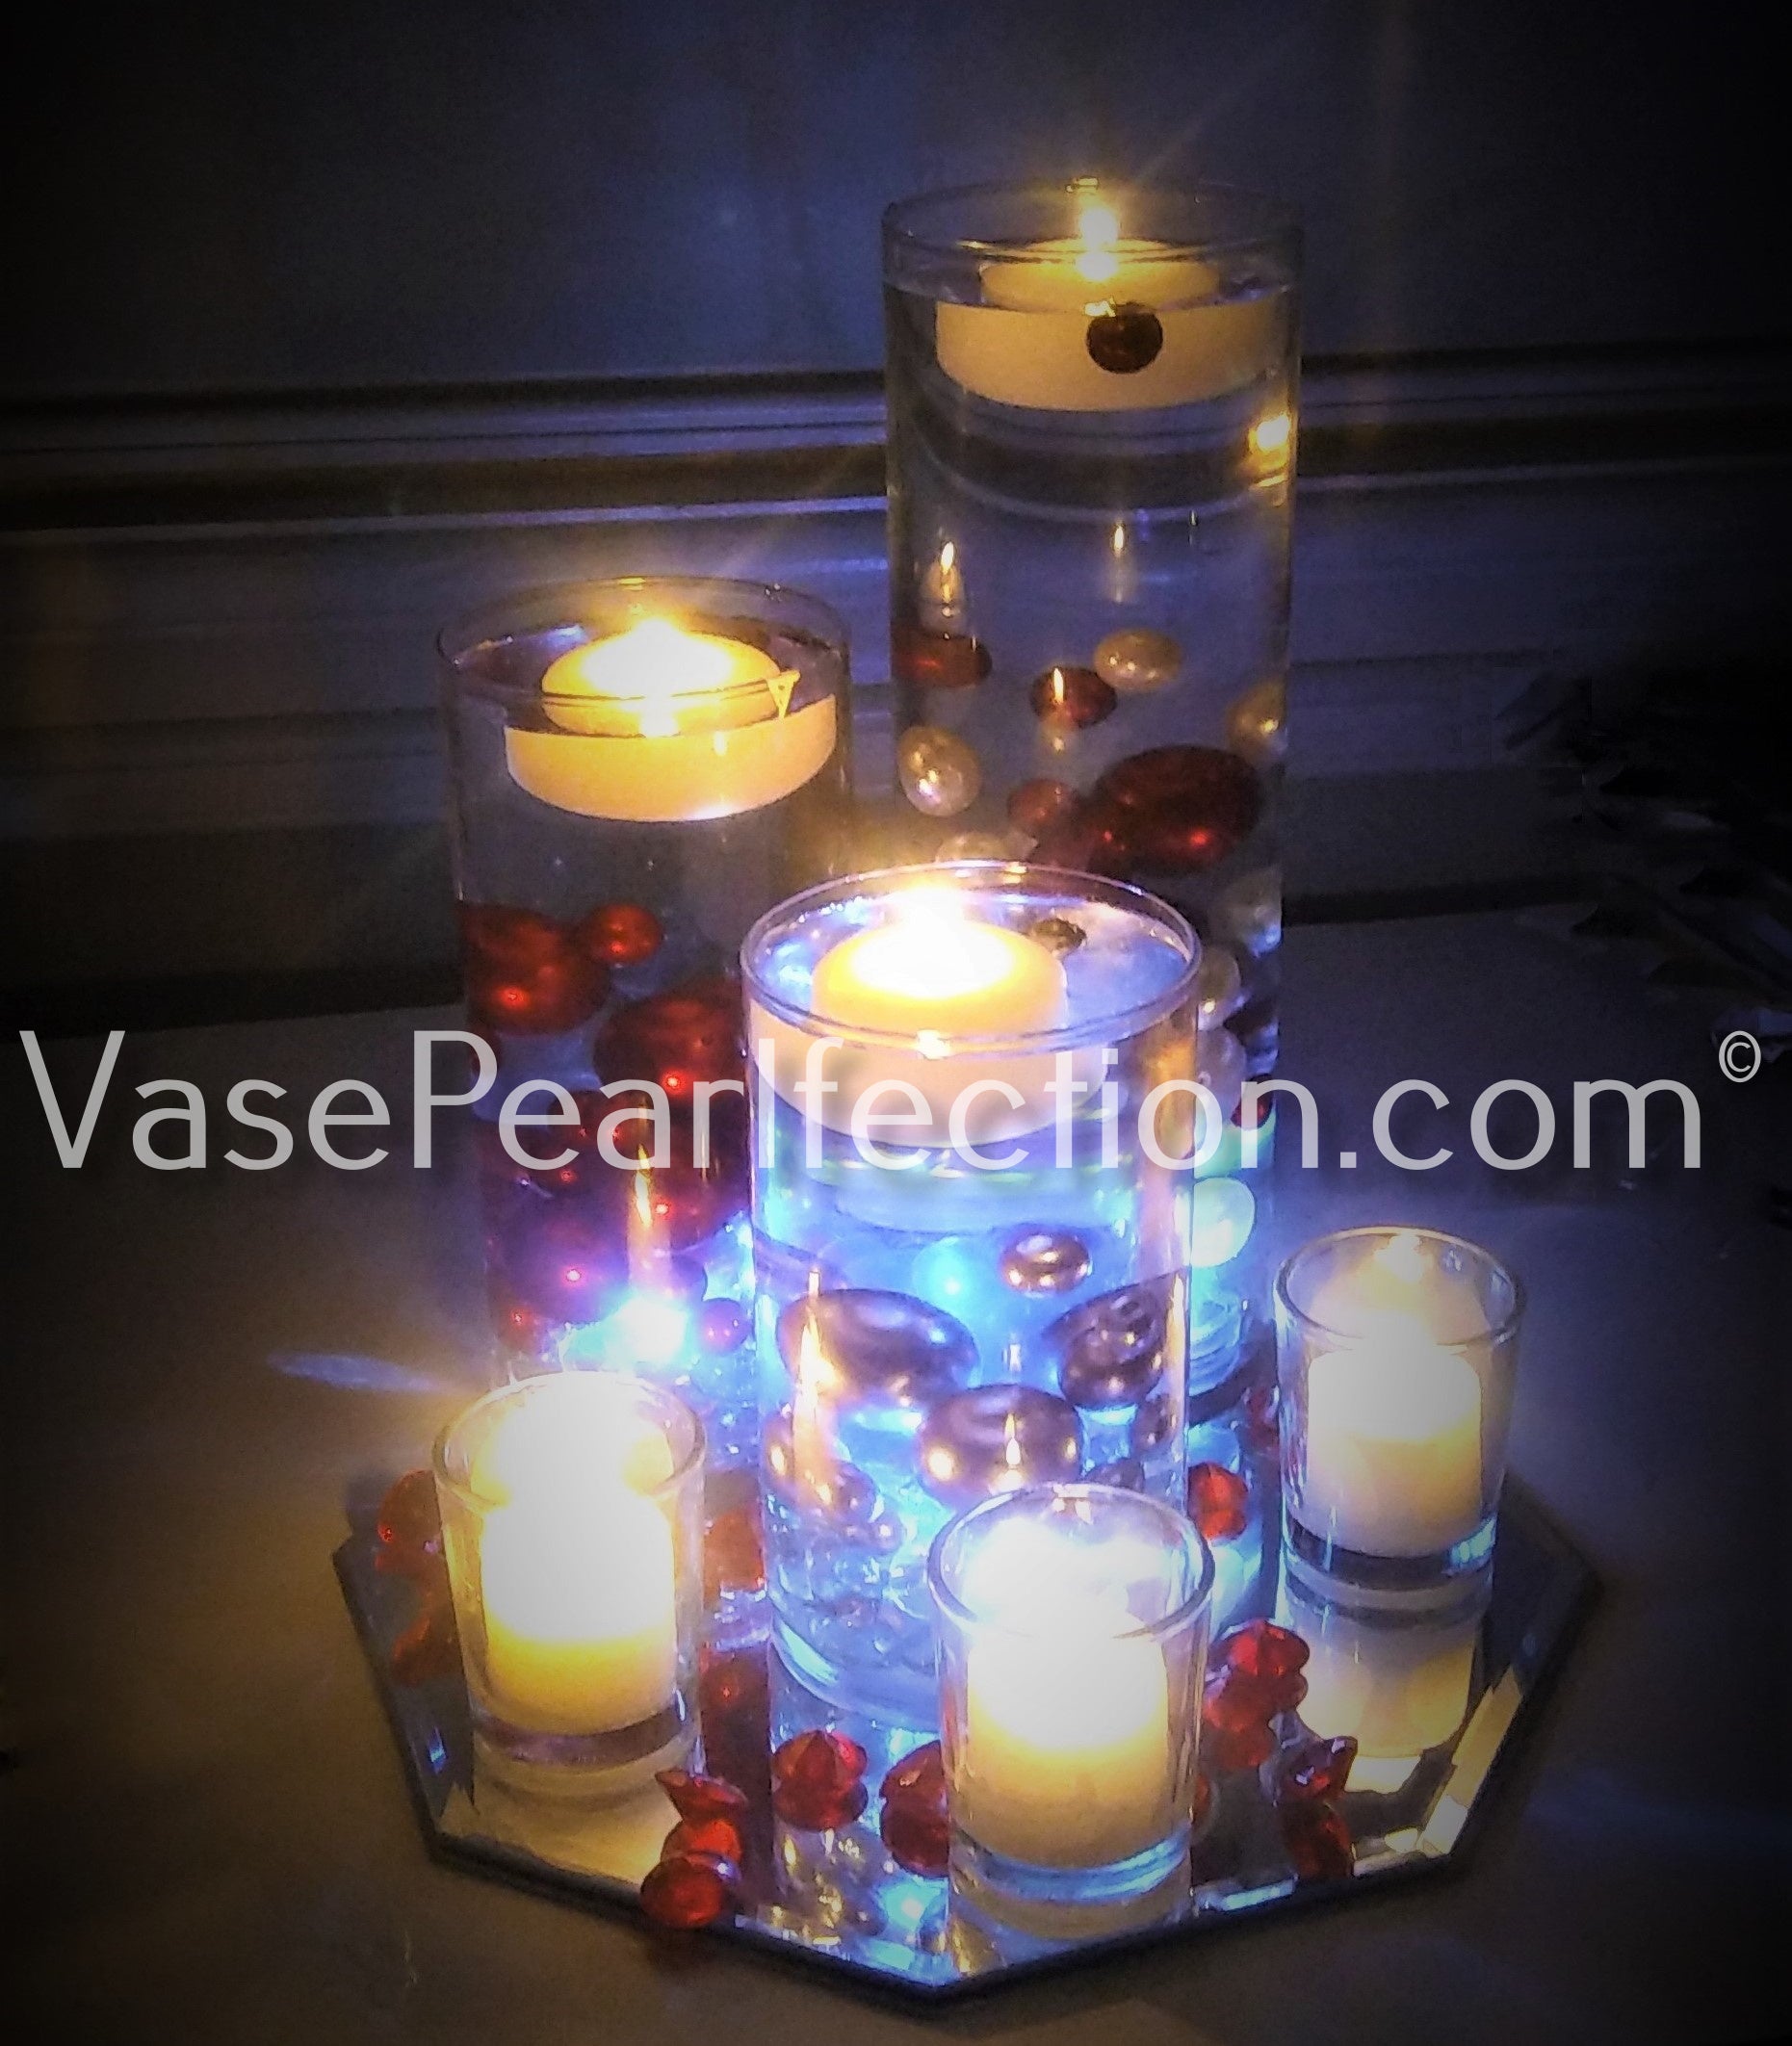 Red & White Pearls for Vase Decorations and Table Scatter – Floating Pearls